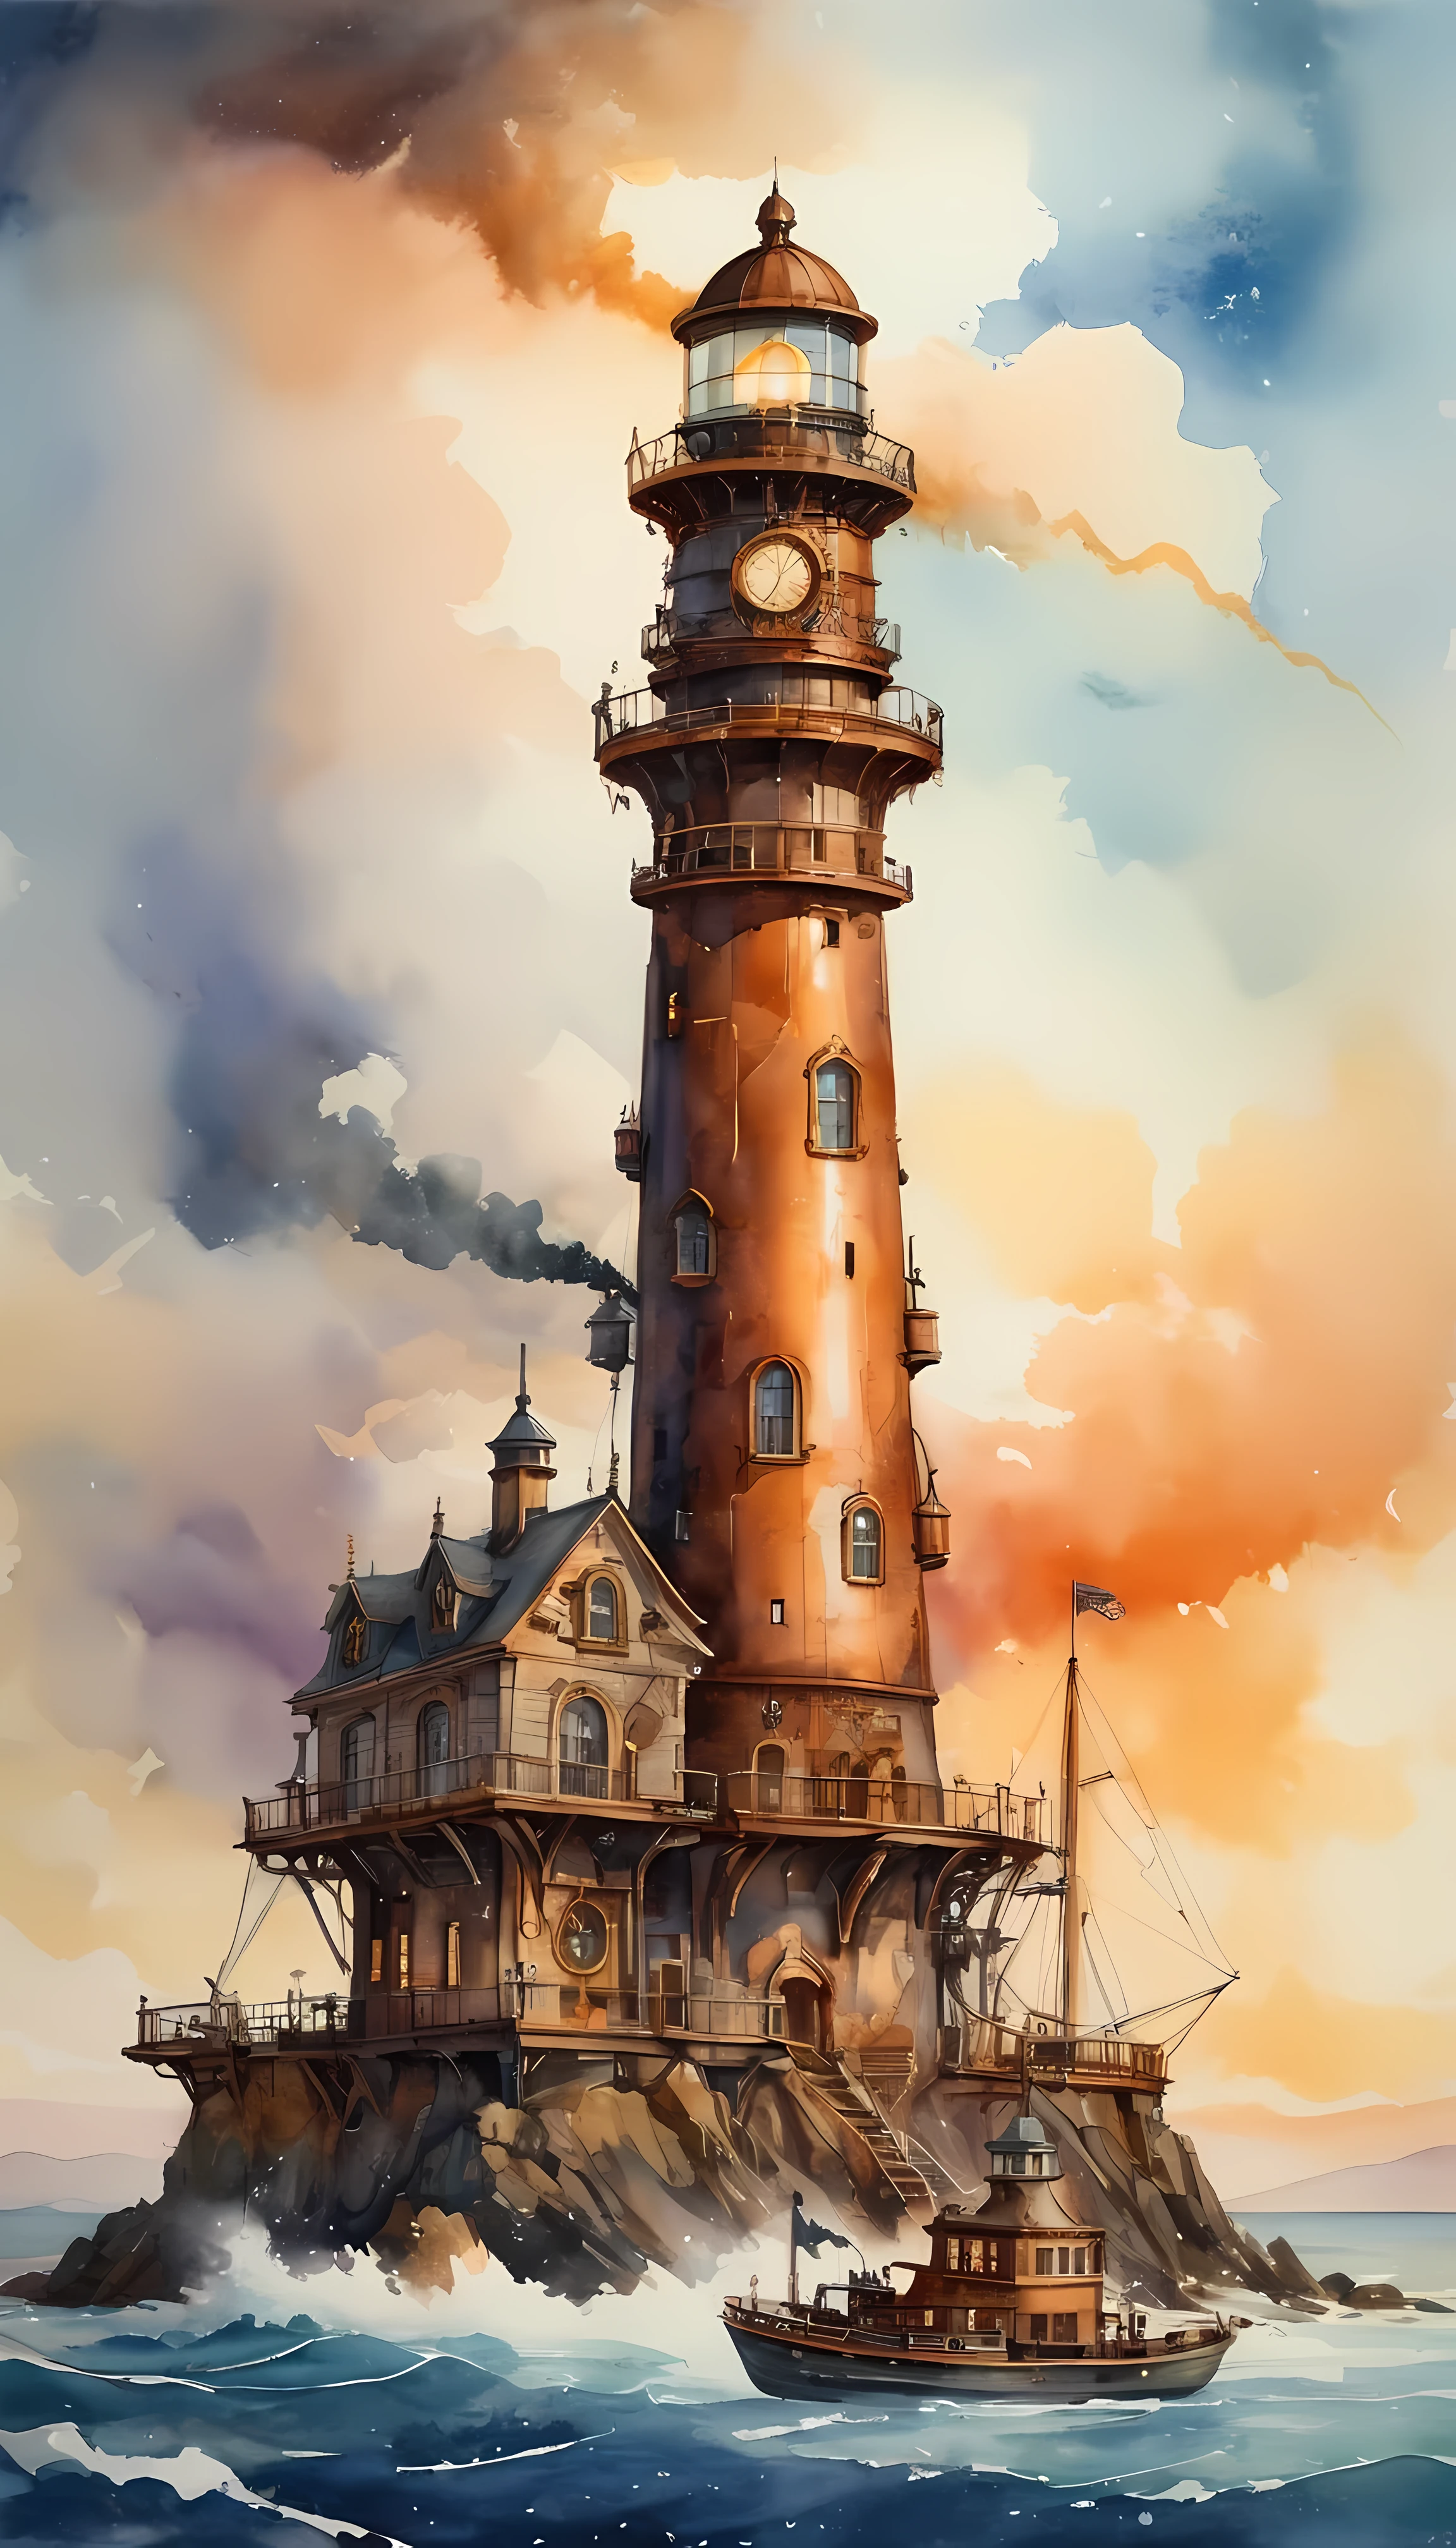 CuteCartoonAF, Cute Cartoon, masterpiece in maximum 16K resolution, superb quality, a steampunk lighthouse featuring a towering structure with brass and copper elements, intricate clockwork mechanisms, warm glowing light, billowing steam clouds, nautical touches, and a weathered look, rich metallic color palette, fine linework and embellishments, retro-futuristic design. | ((More_Detail))